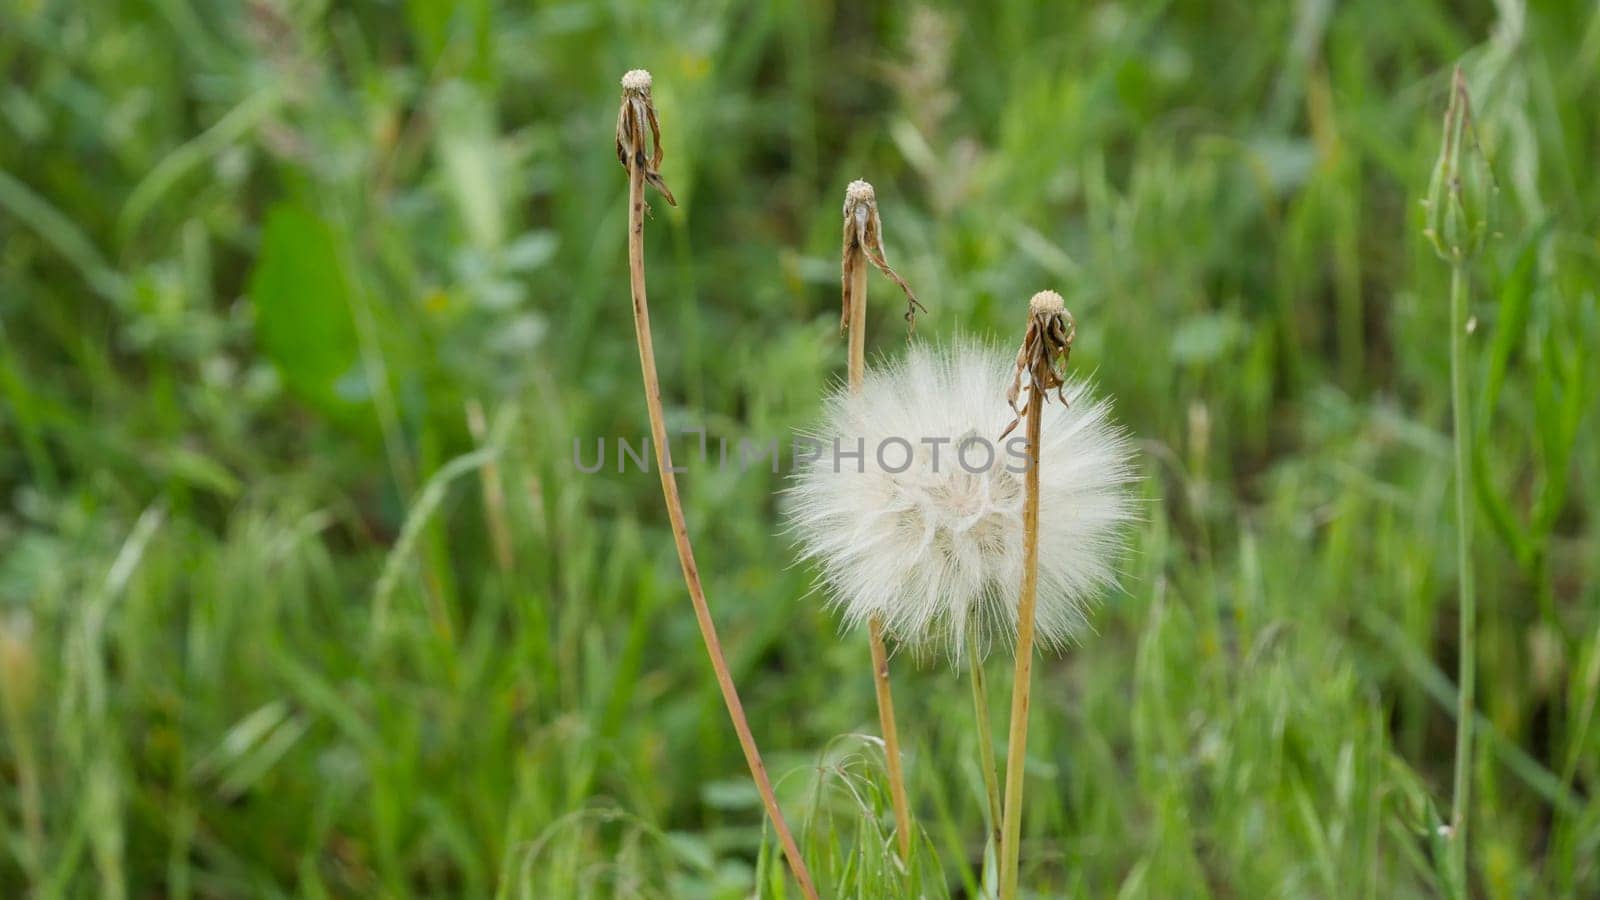 dandelion plant, which is one of the medicinal plants, ripe dandelion plant,